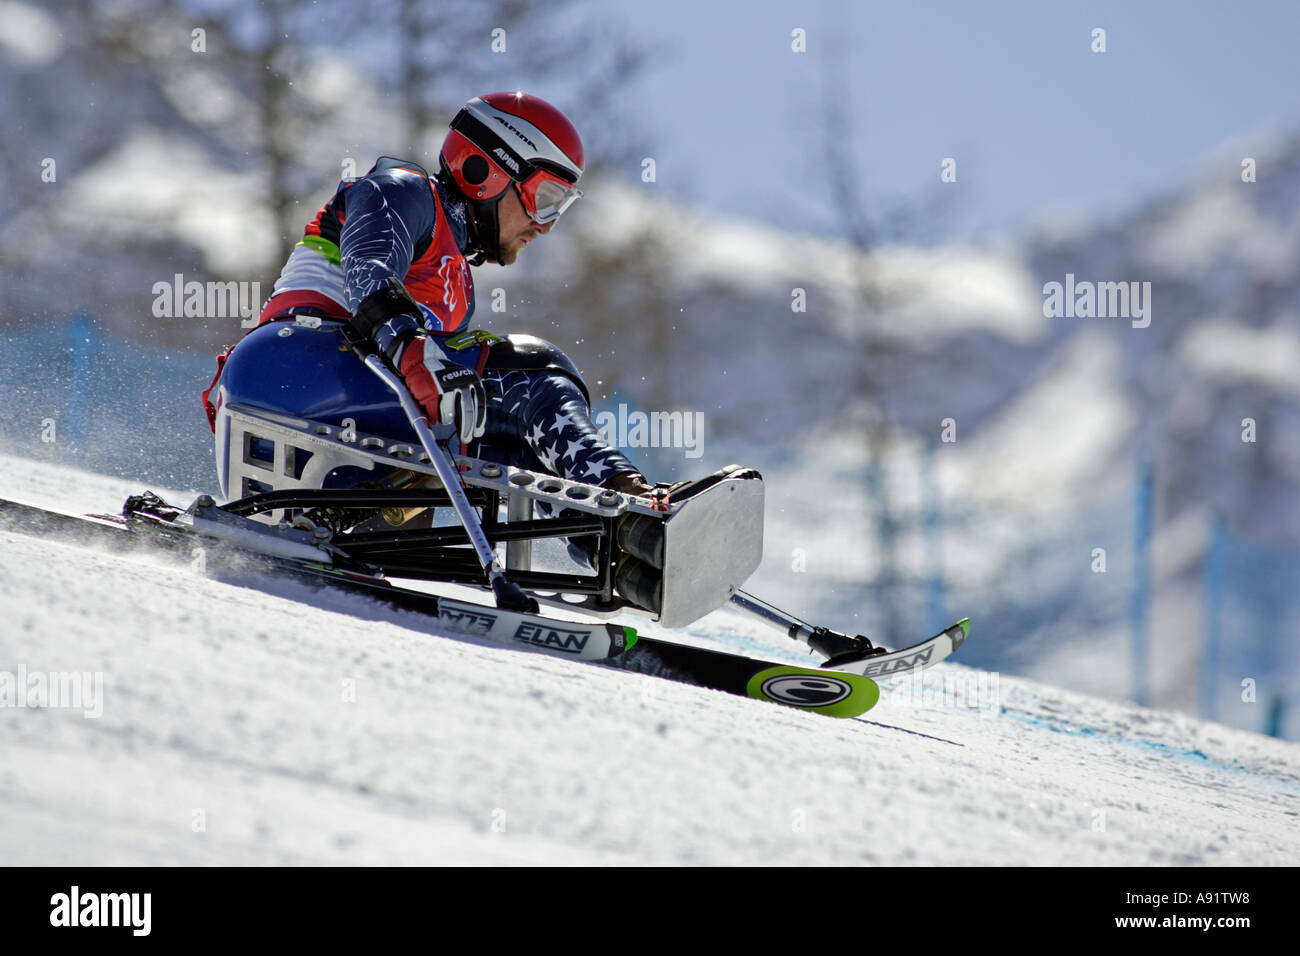 Christopher Devlin Young LW12 1 of the USA in the Mens Alpine Skiing Super G Sitting competition Stock Photo